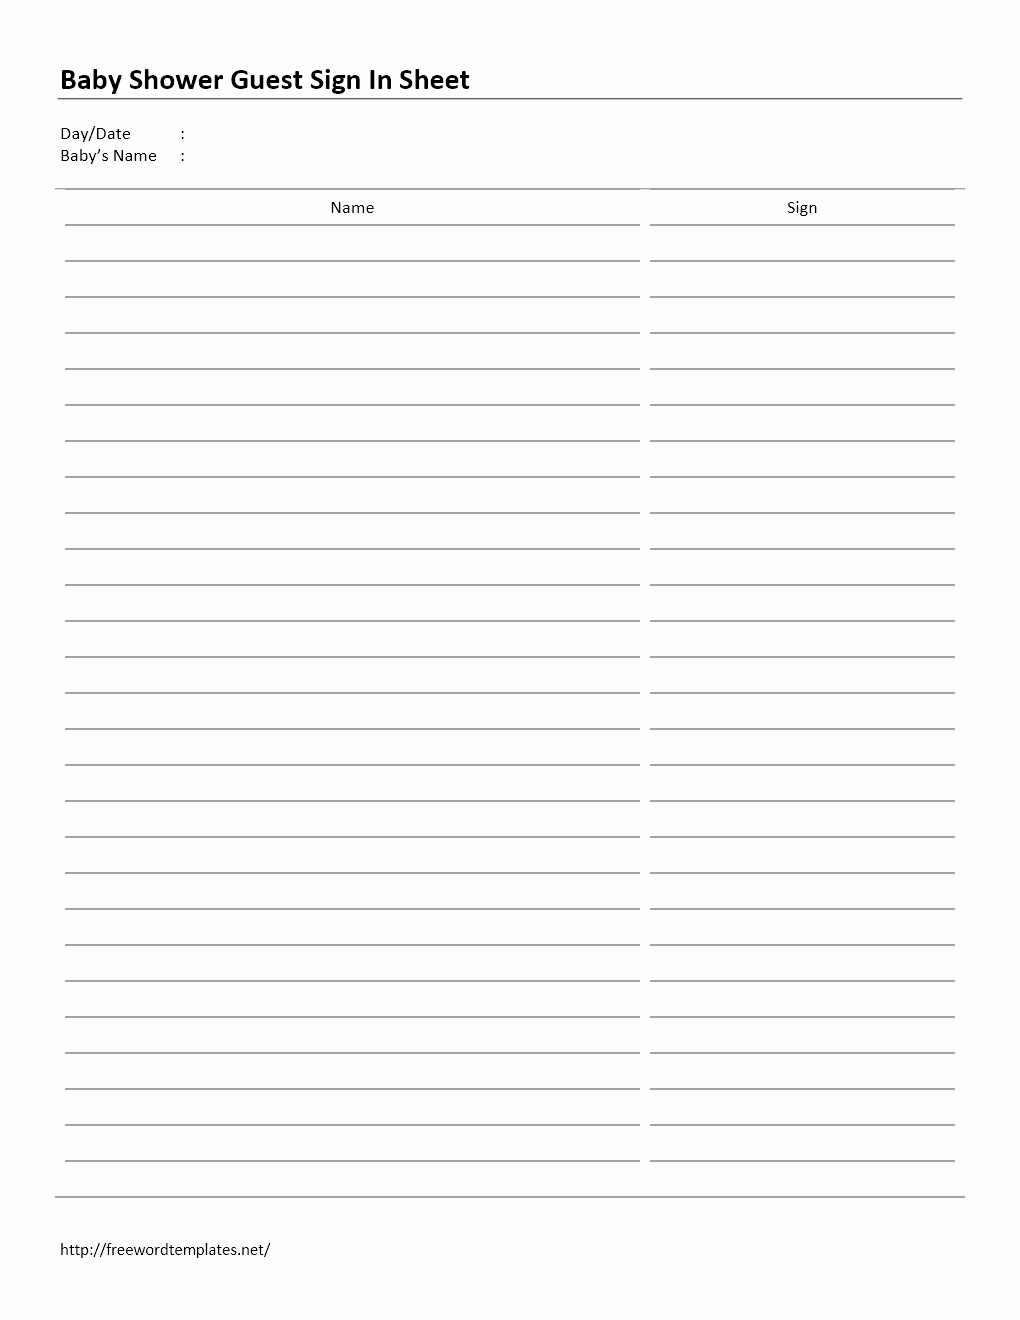 Guest Sign In Sheet Fresh Free Microsoft Word Templates Part 5